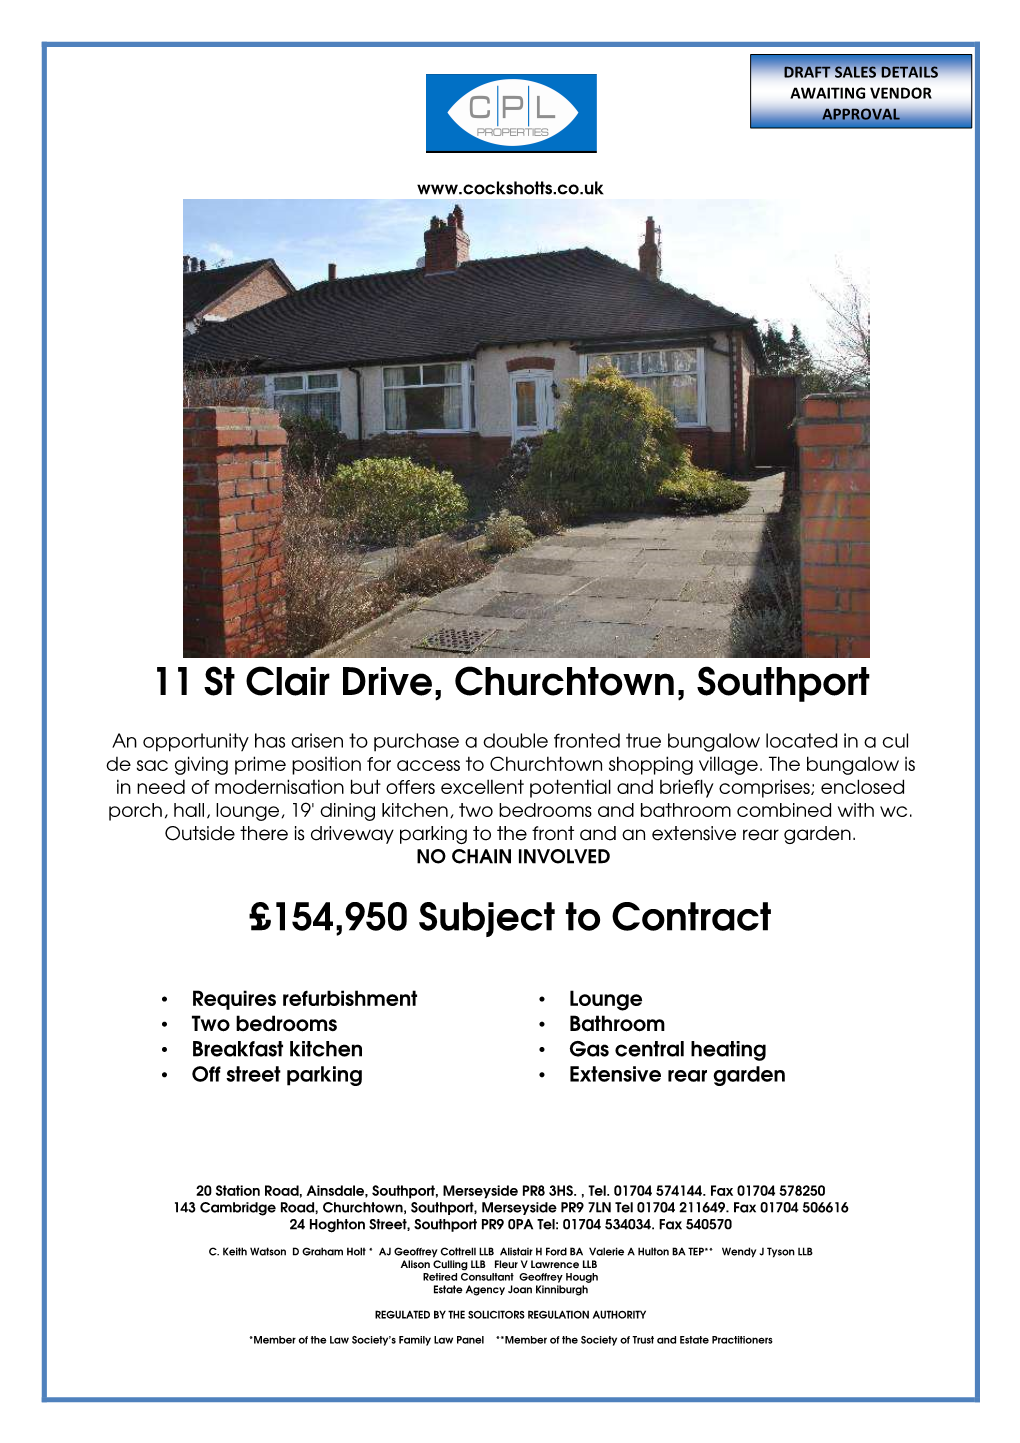 11 St Clair Drive, Churchtown, Southport